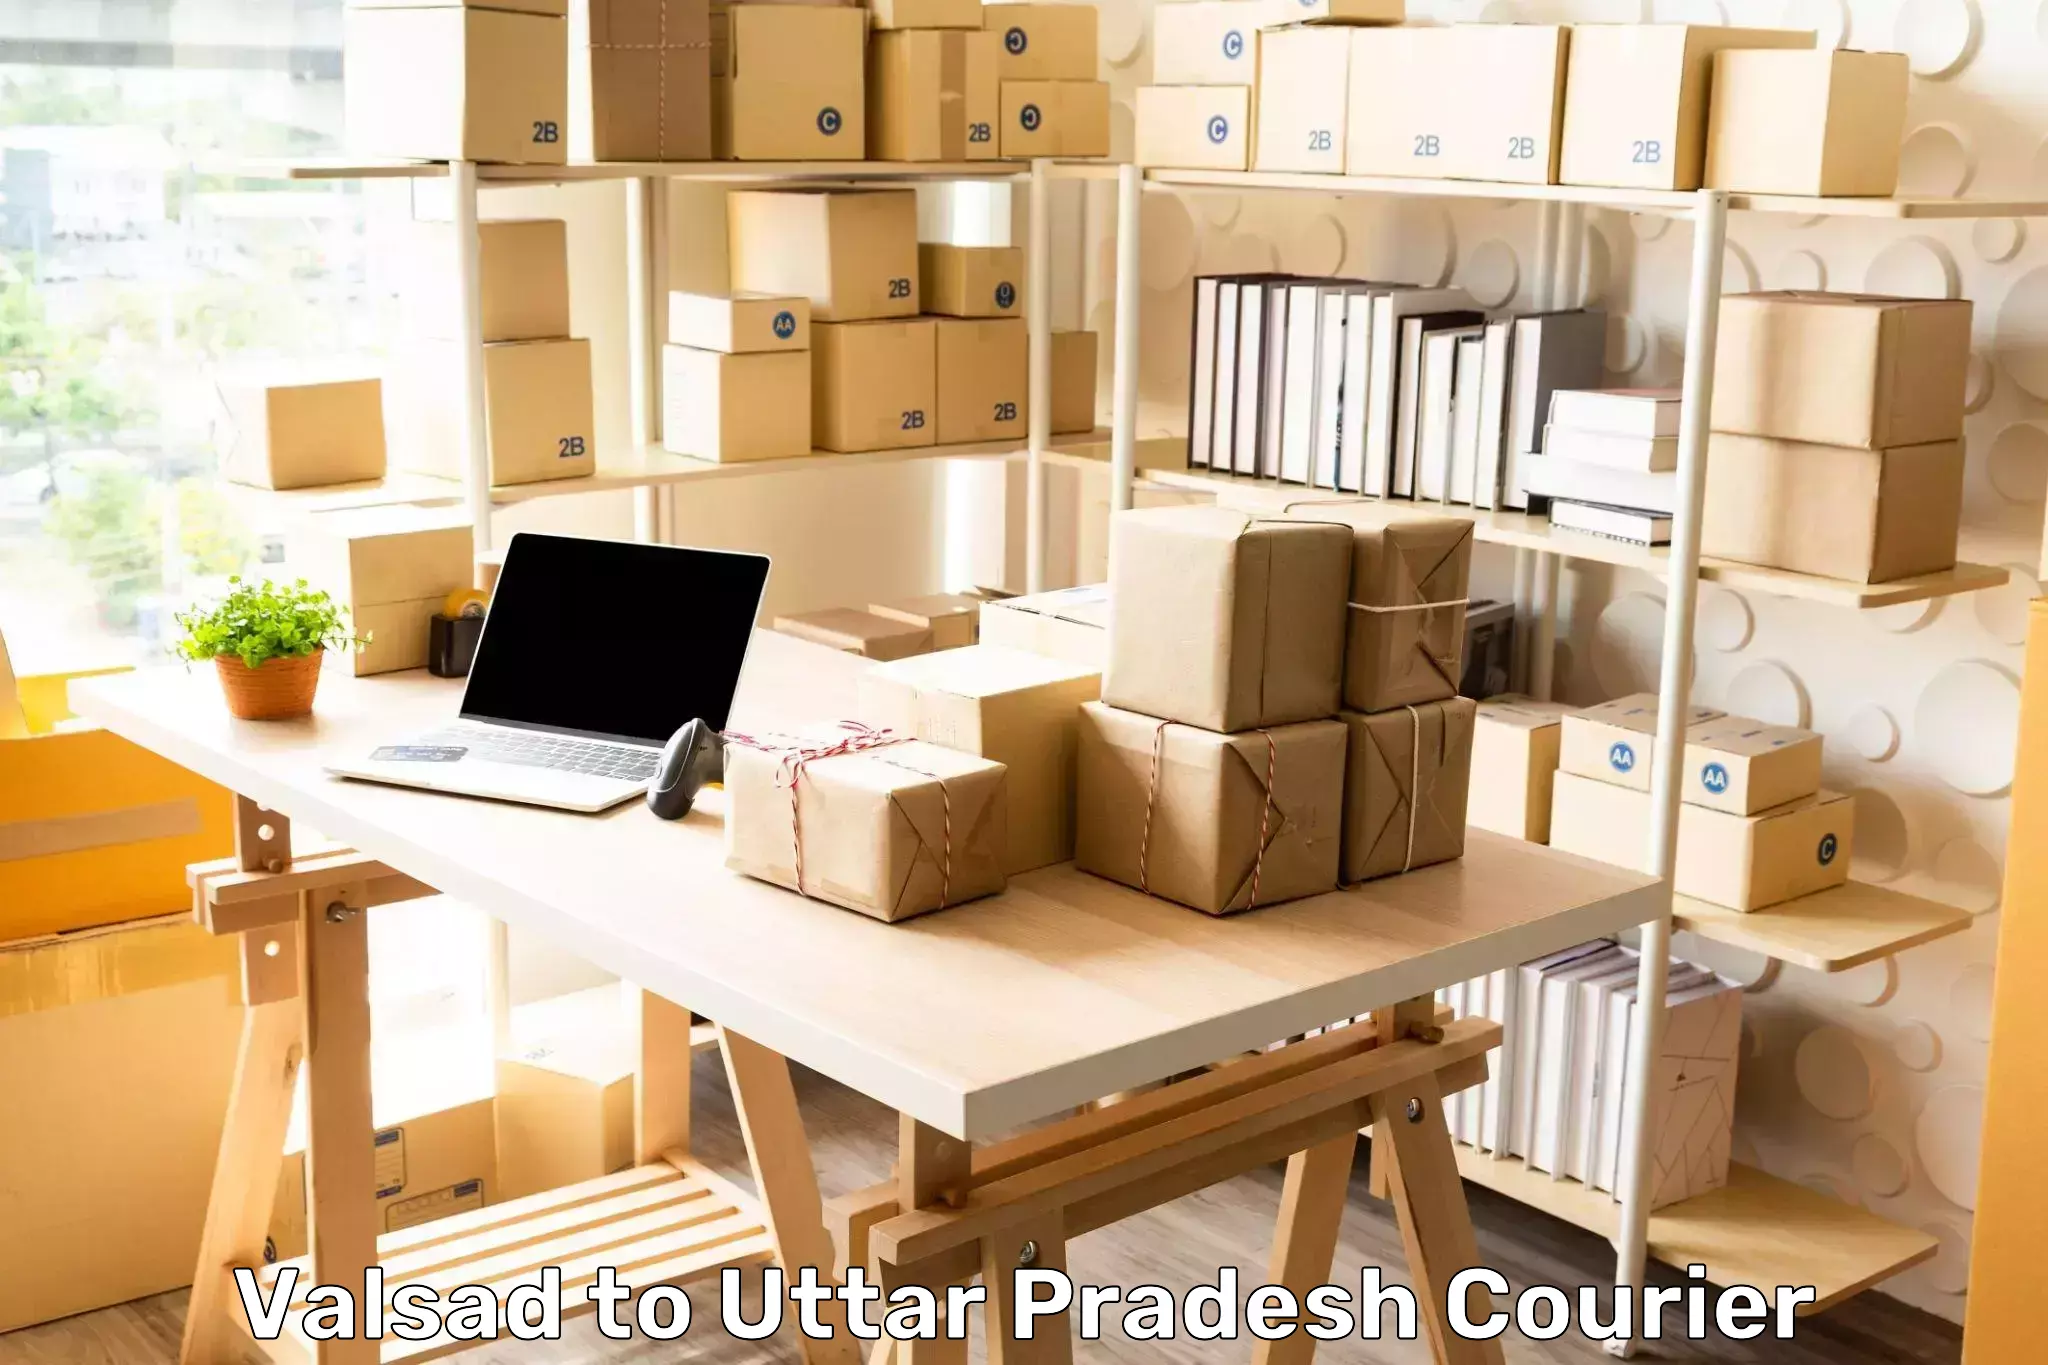 Reliable package handling Valsad to Mariahu